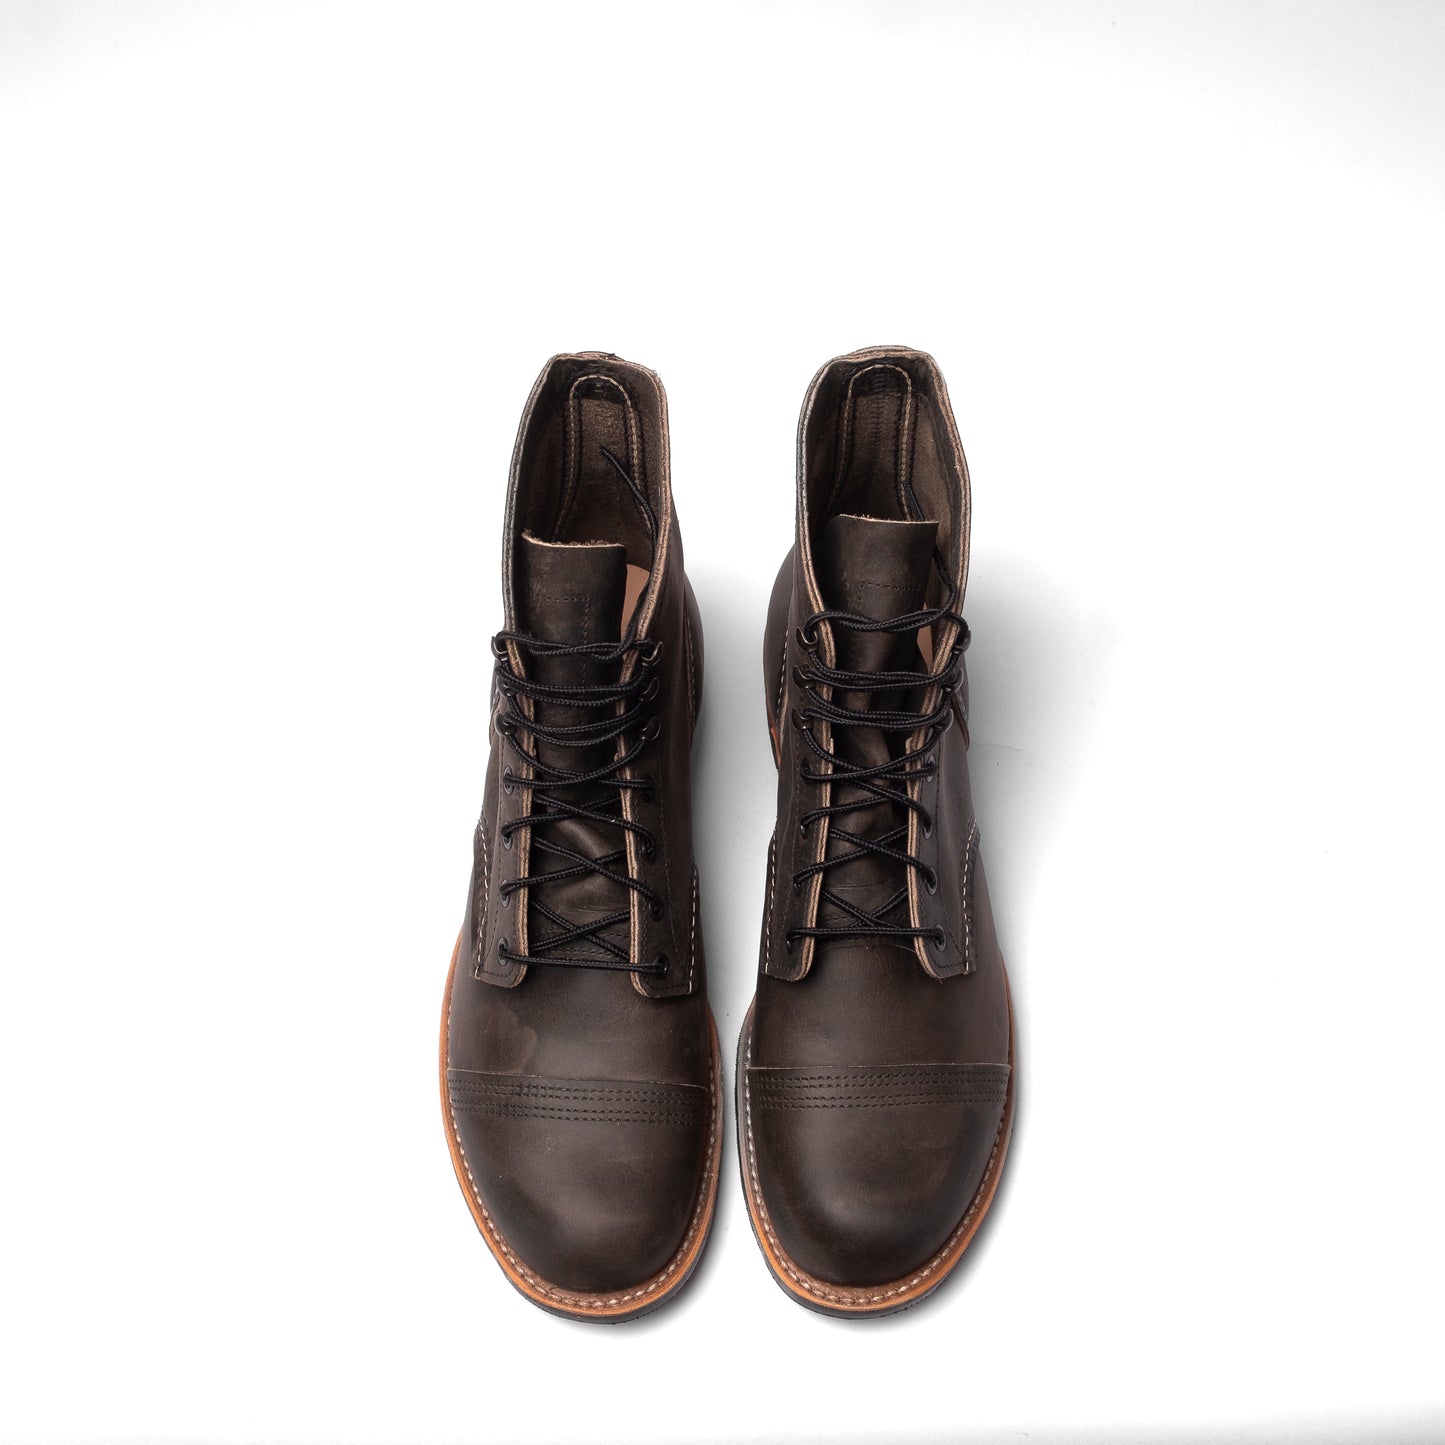 RED WING SHOES - 8086 IRON RANGER Charcoal Rough & Tough